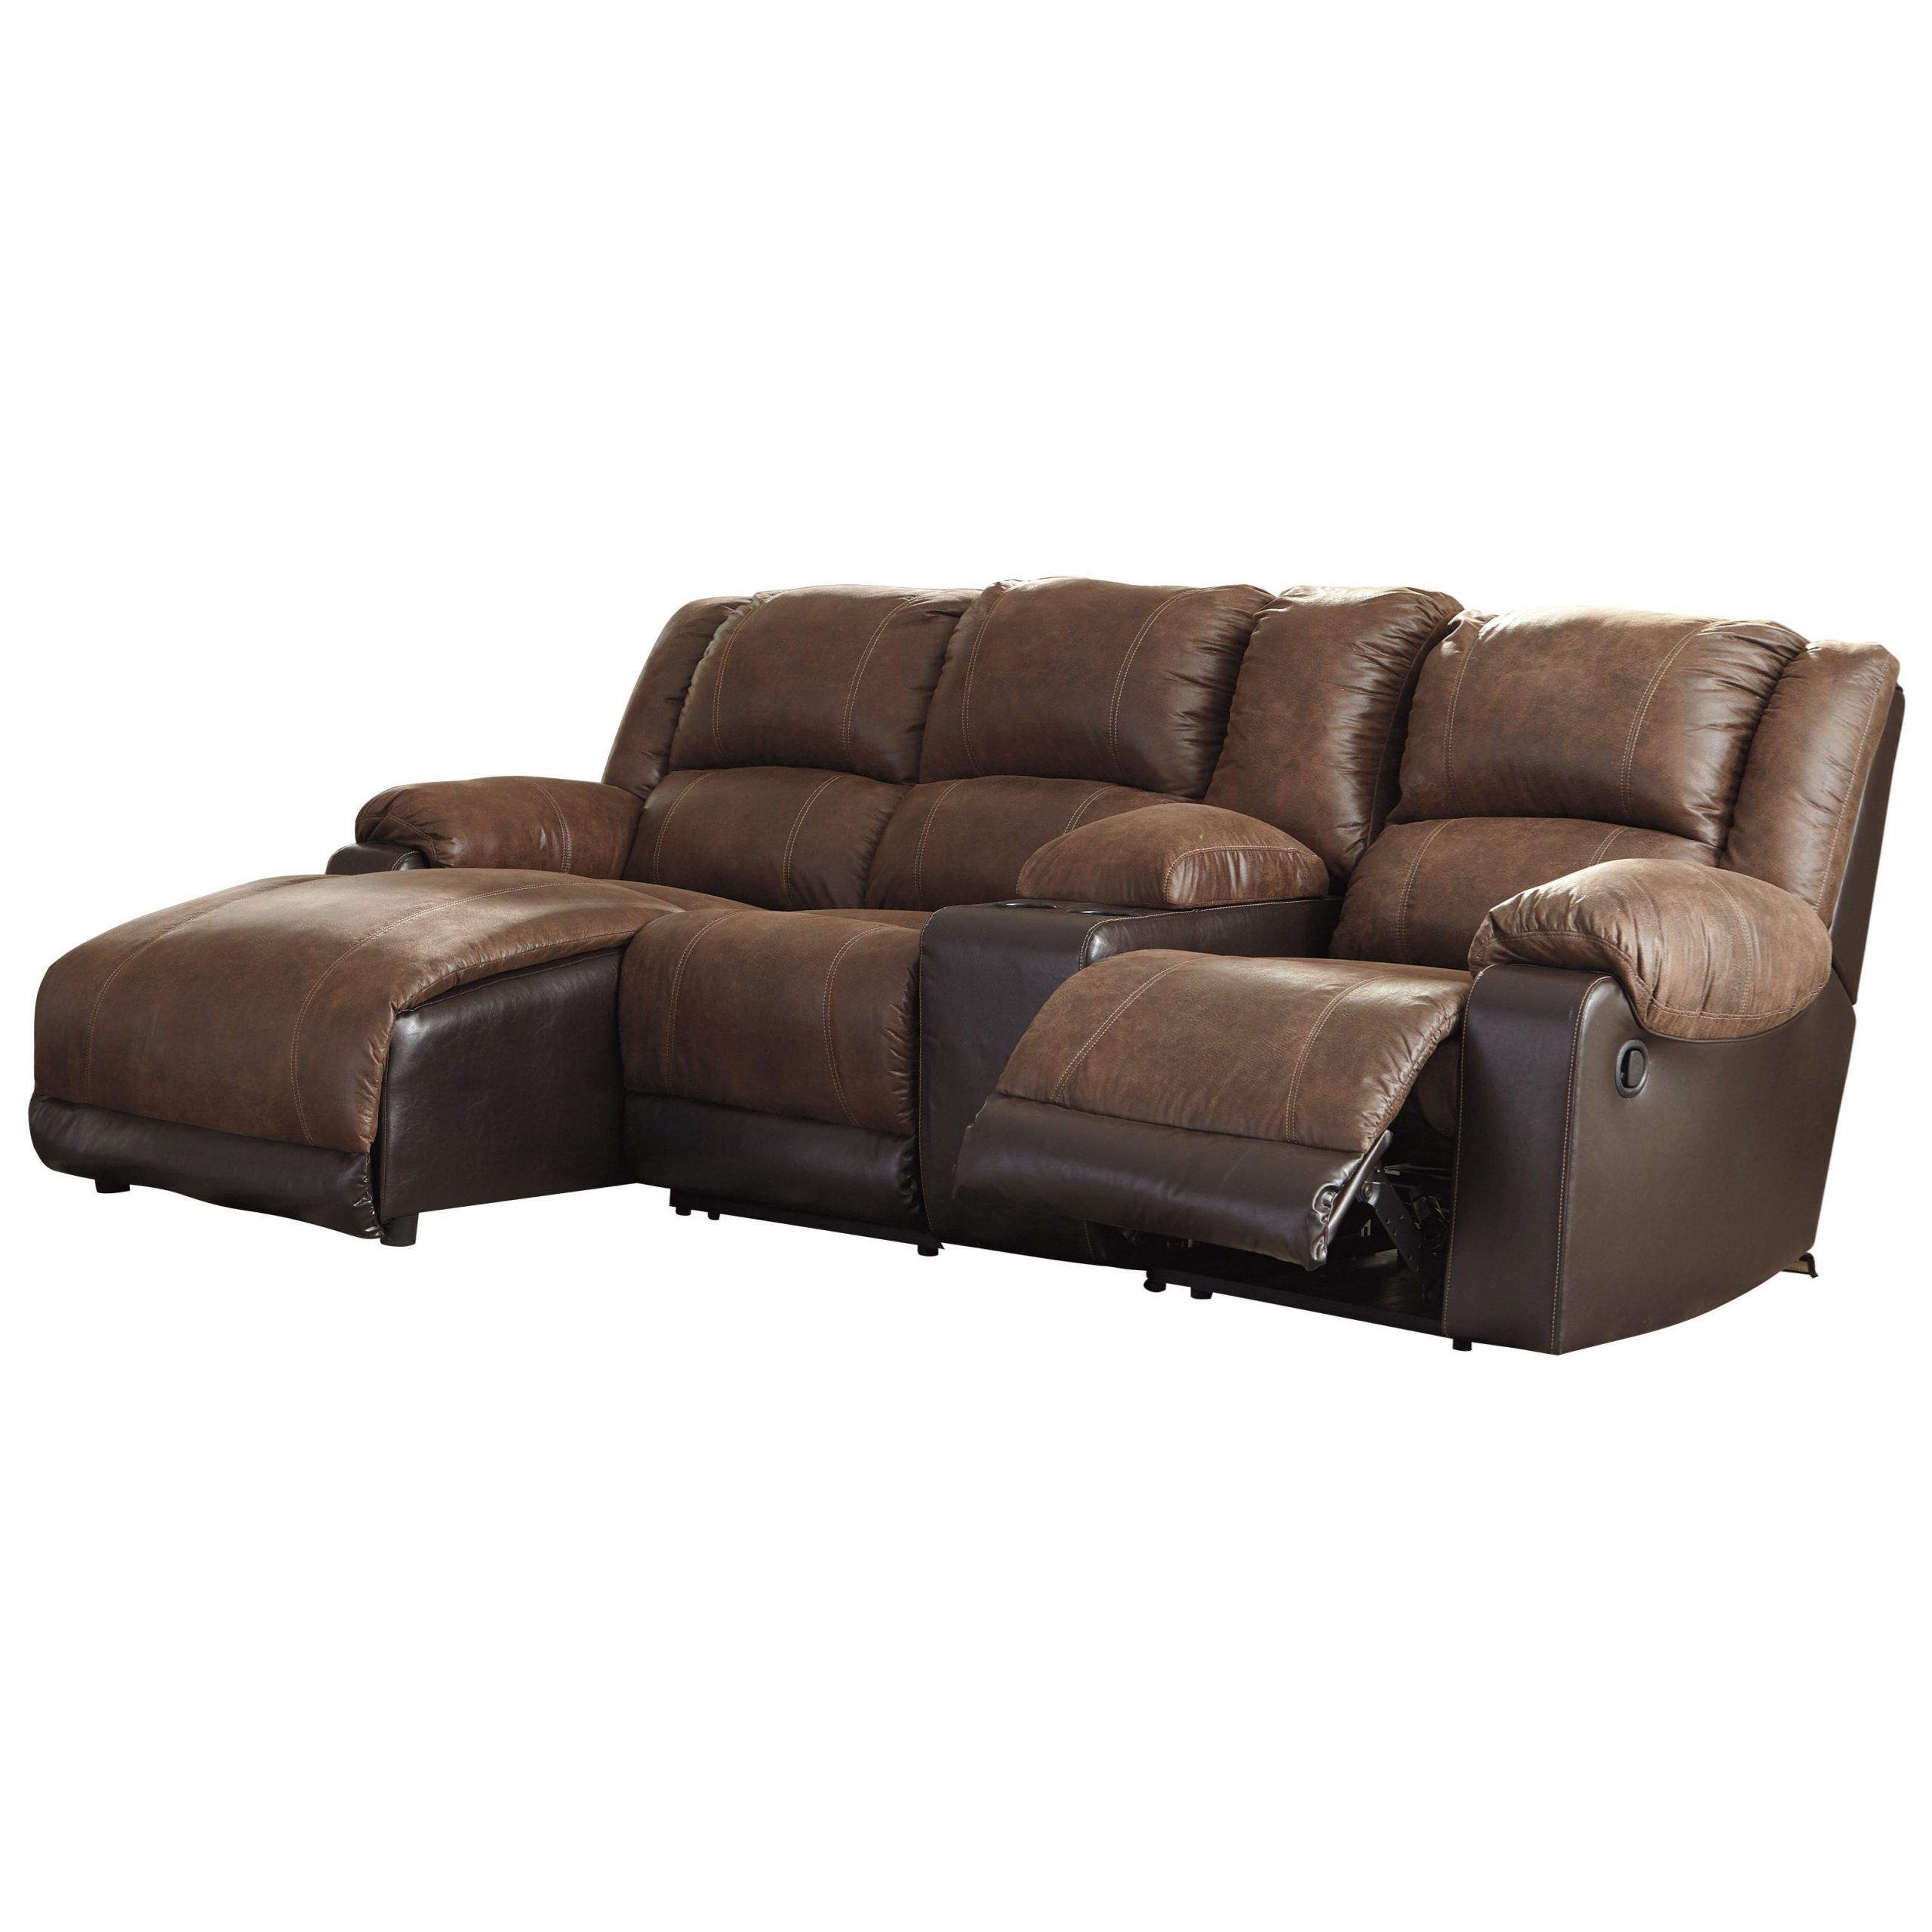 Signature Designashley Nantahala Reclining Chaise Sofa With Celine Sectional Futon Sofas With Storage Reclining Couch (View 4 of 15)